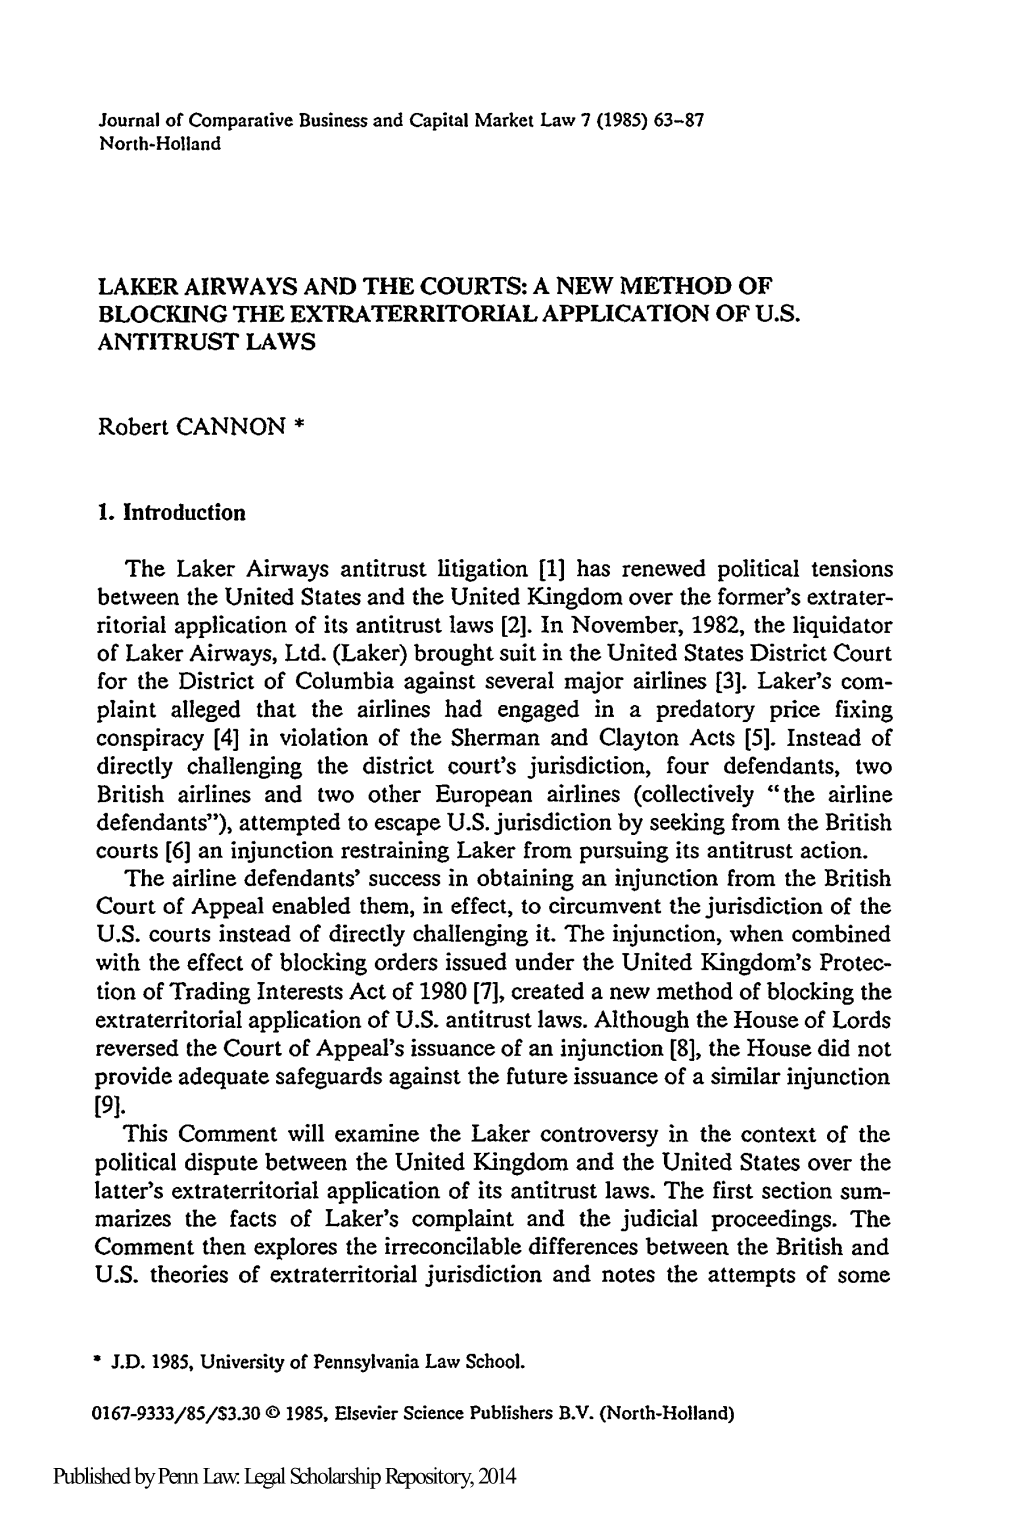 Laker Airways and the Courts: a New Method of Blocking the Extraterritorial Application of U.S